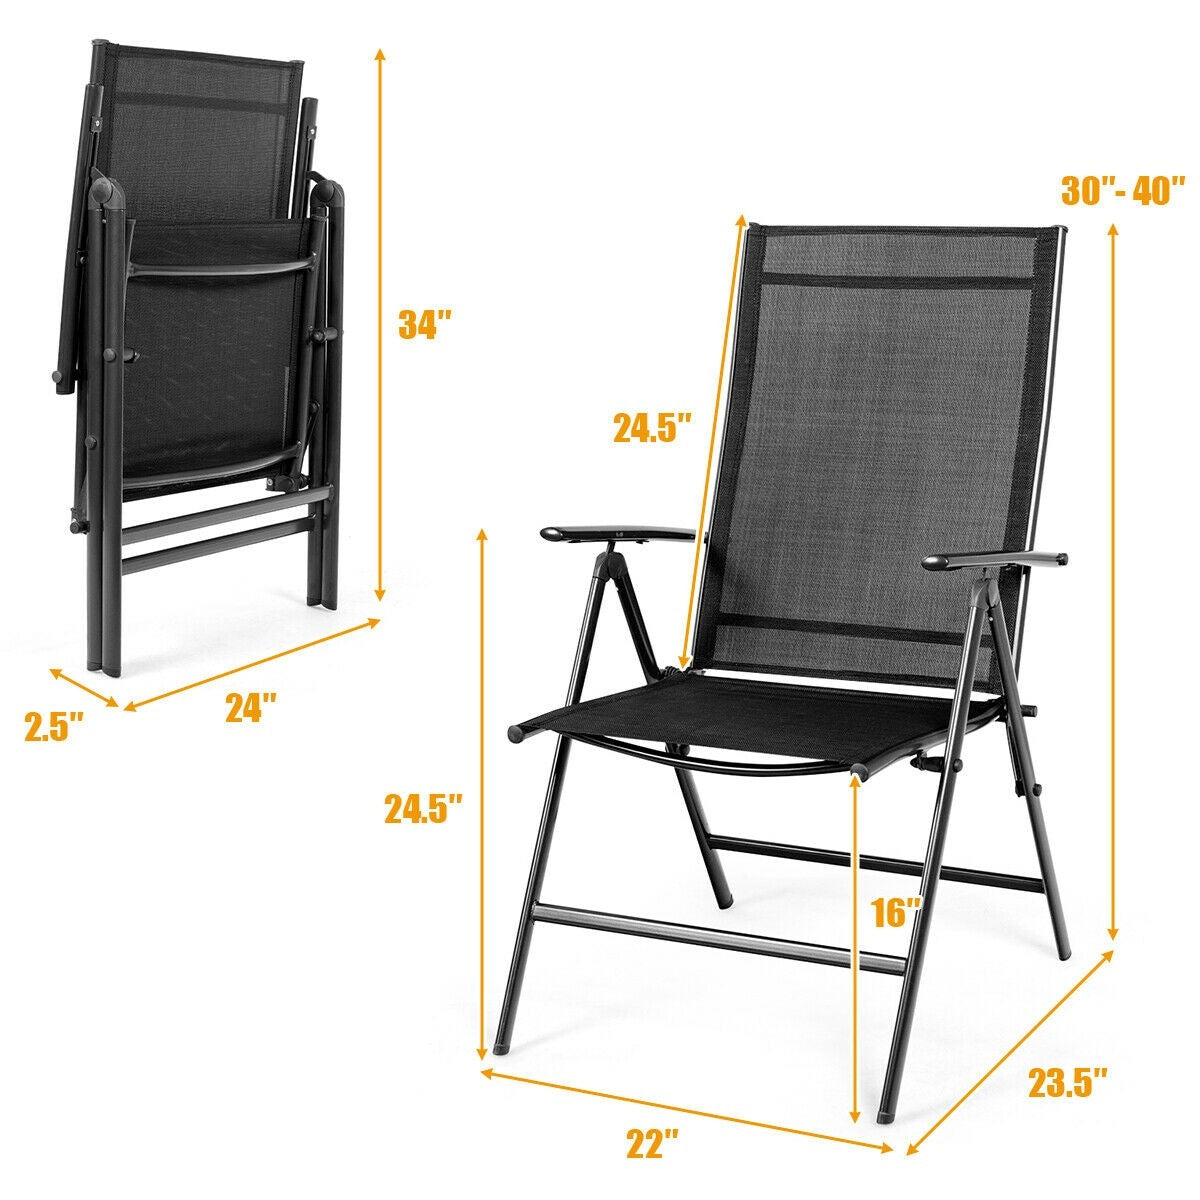 Giantex Set of 2 Patio Dining Chairs, Folding Outdoor Chairs (Black)